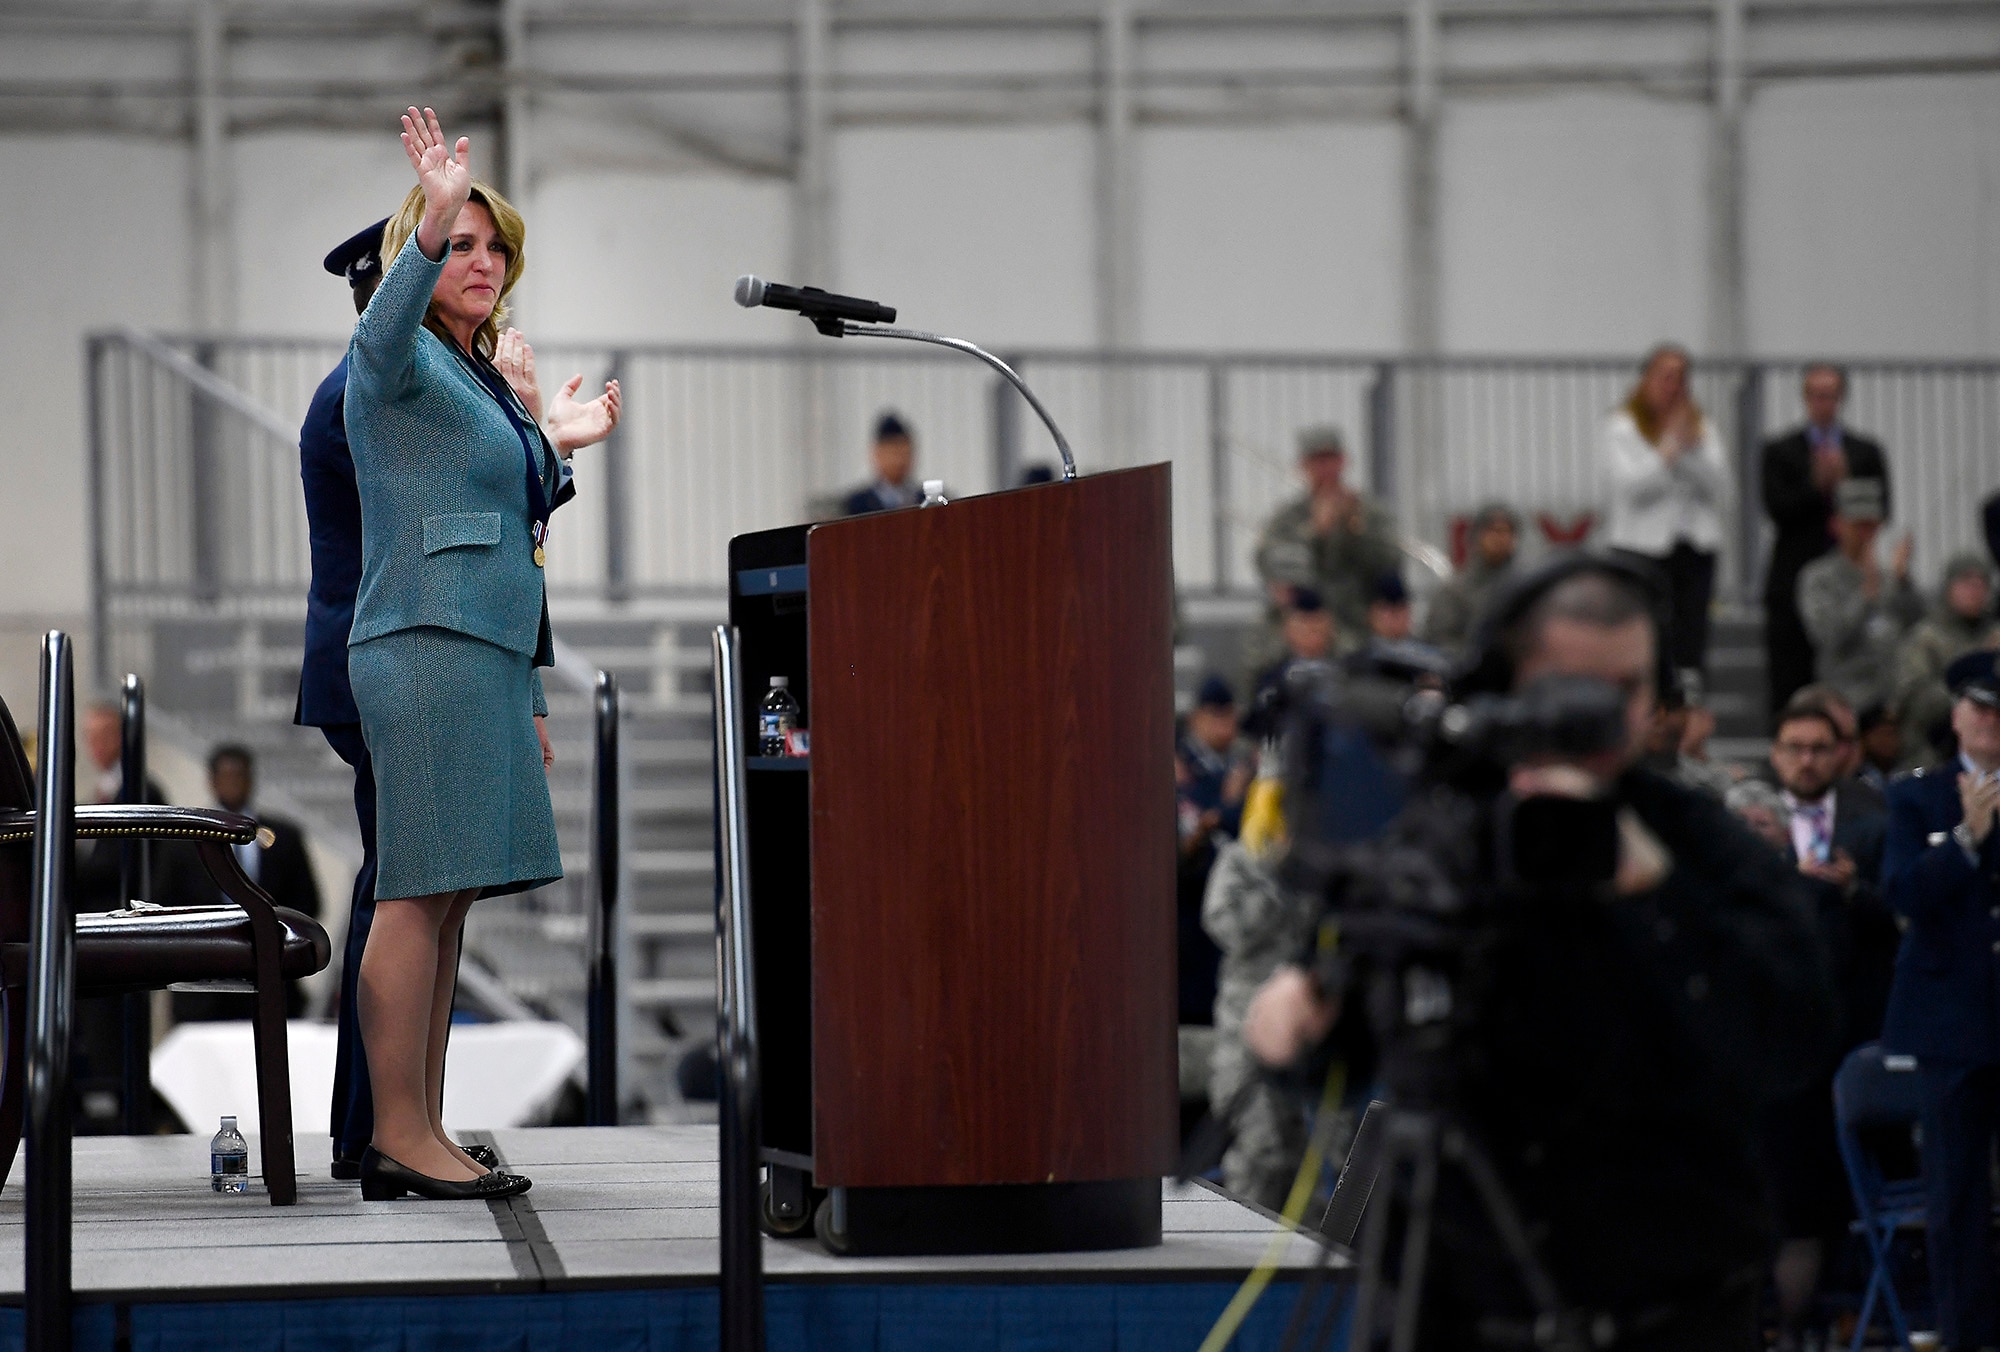 Secretary of the Air Force Deborah Lee James waves to attendees during her farewell ceremony at Joint Base Andrews, Md., Jan. 11, 2017.  James took office as the 23rd secretary of the Air Force in December 2013. (U.S. Air Force photo/Scott M. Ash)